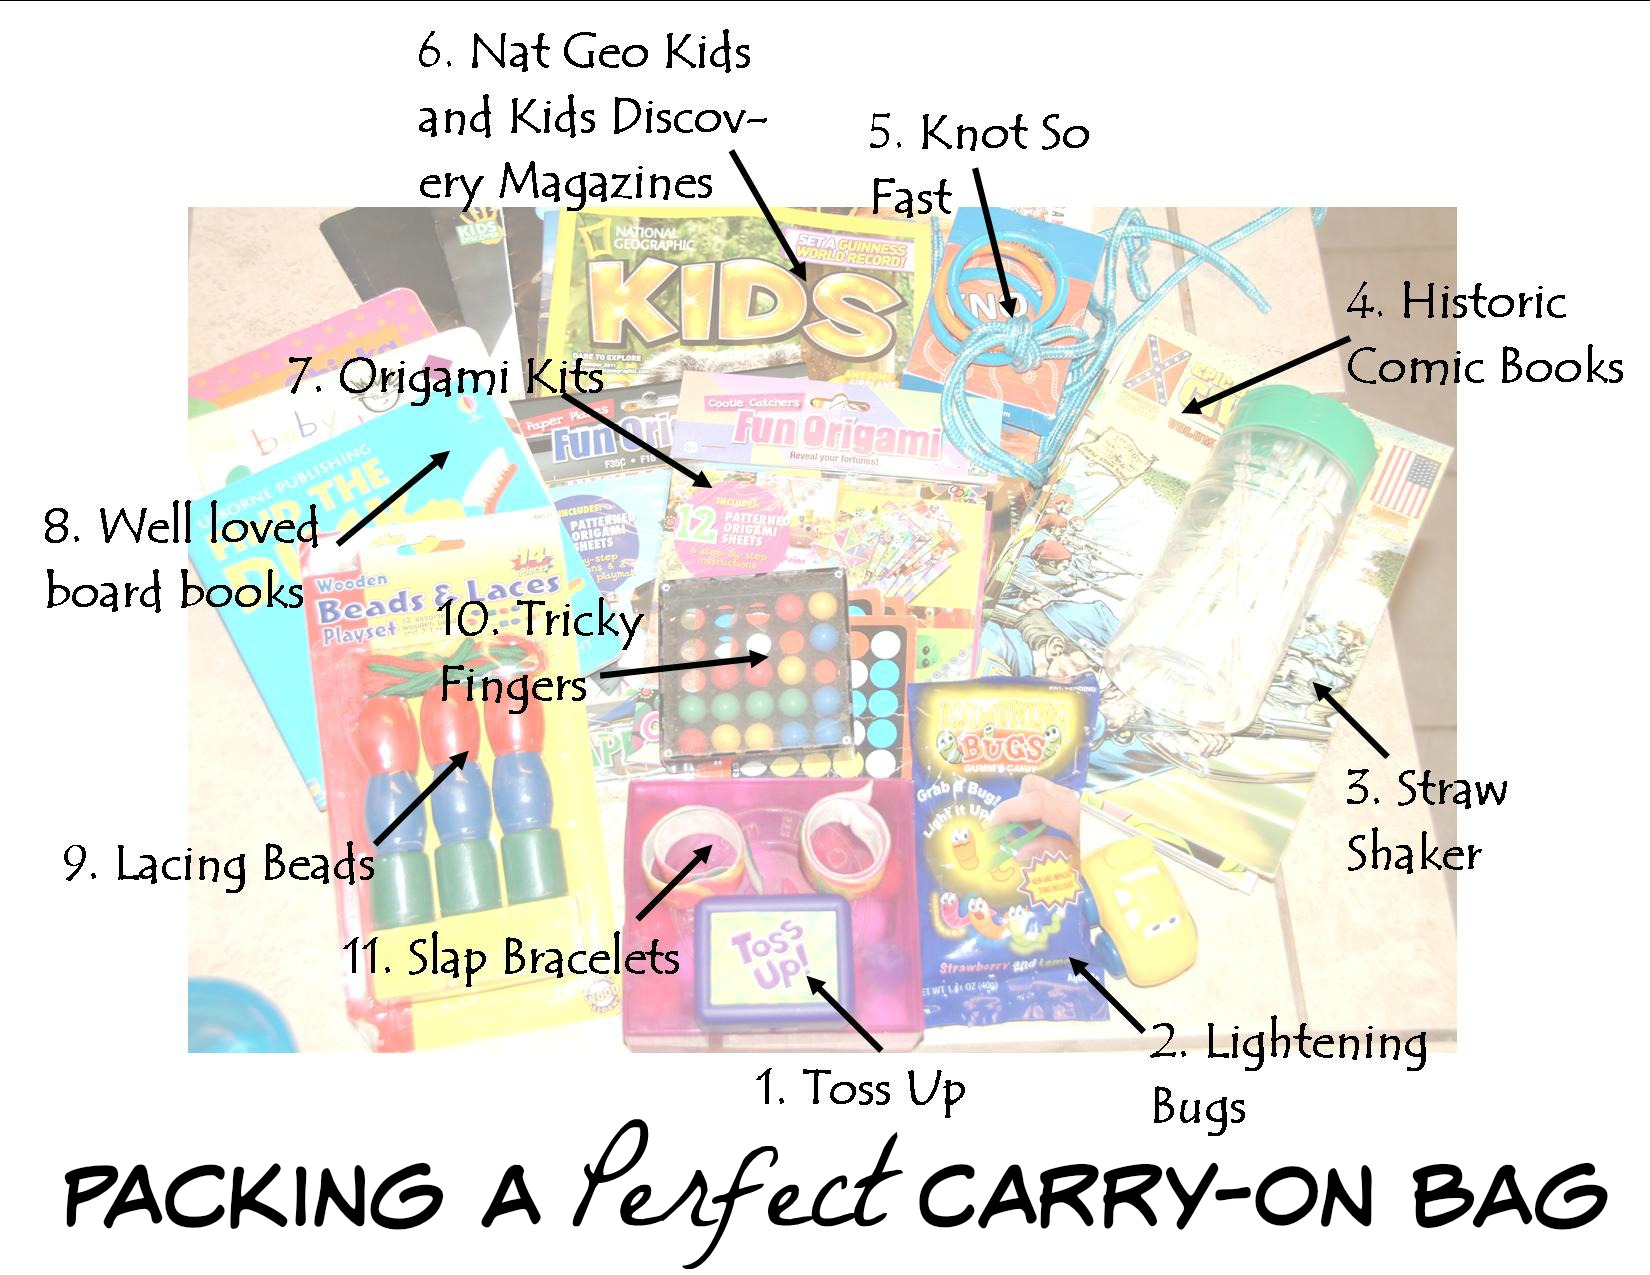 Travel Tips Tuesday: Packing a Carry-on Bag for Kids that Actually Entertains Kids